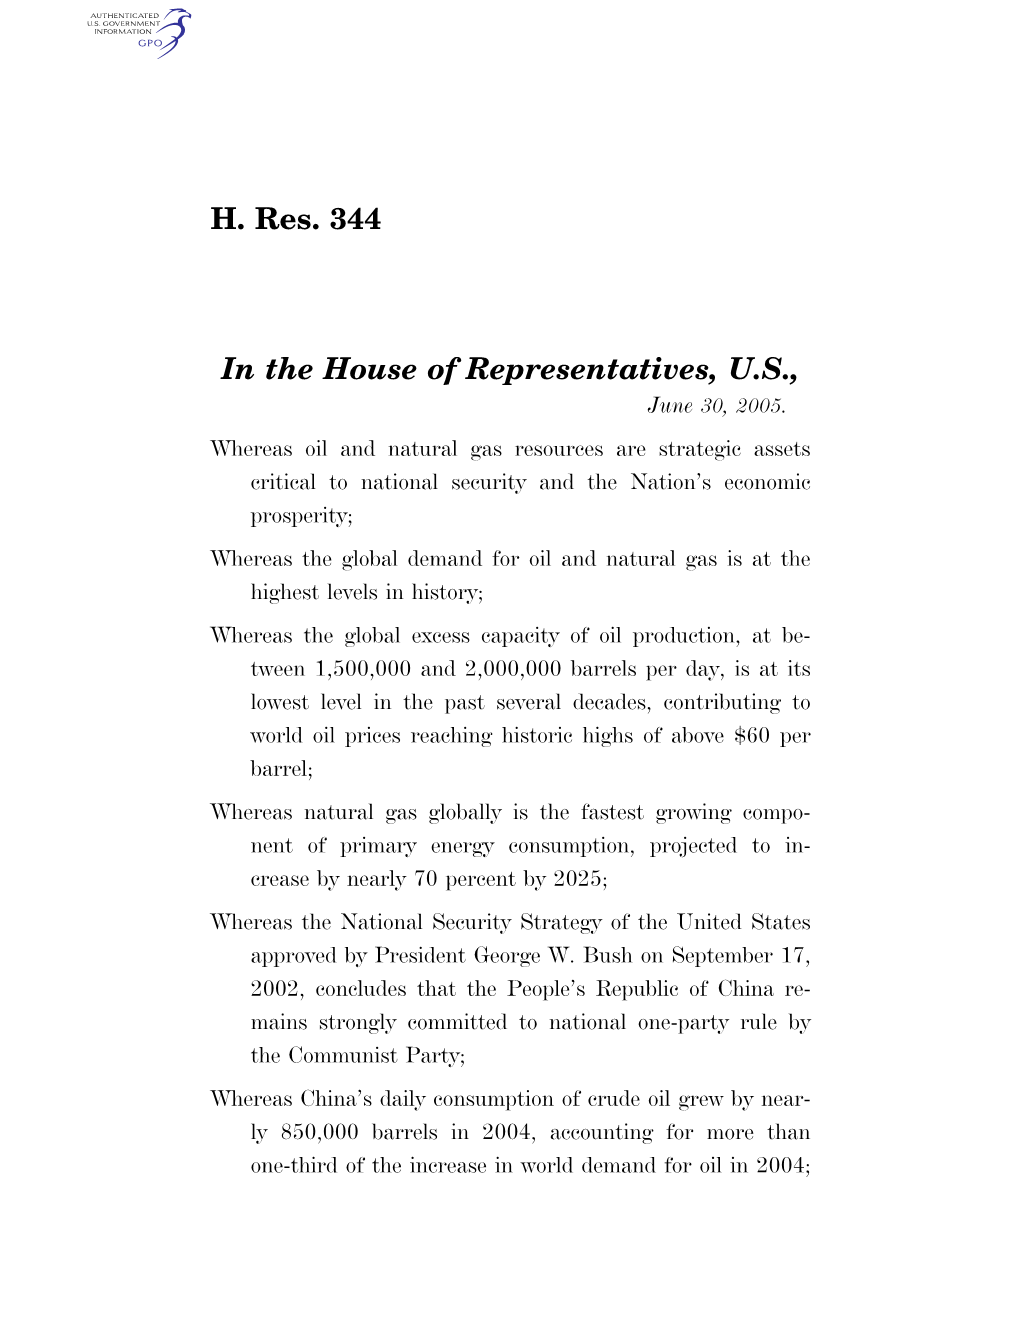 H. Res. 344 in the House of Representatives, U.S